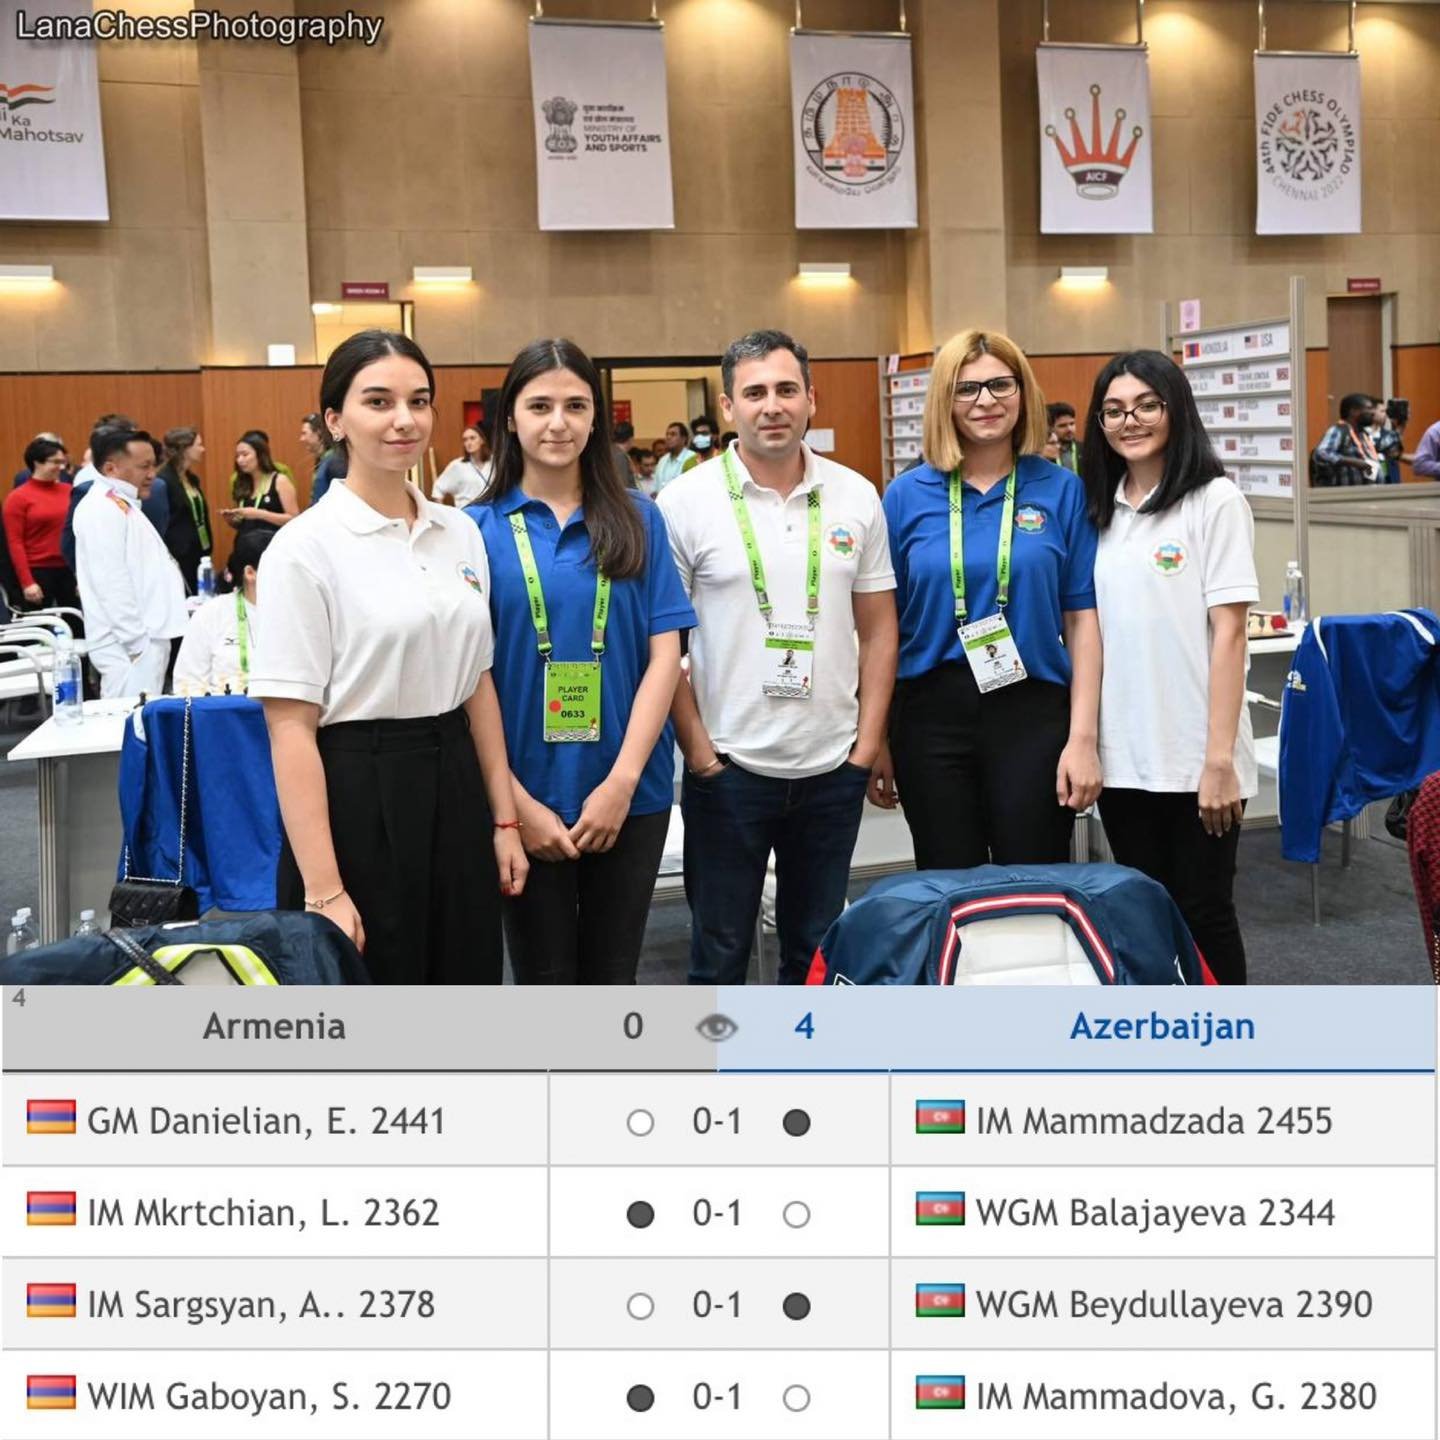 Our girls' national team was successful in the 44th World Chess Olympiad